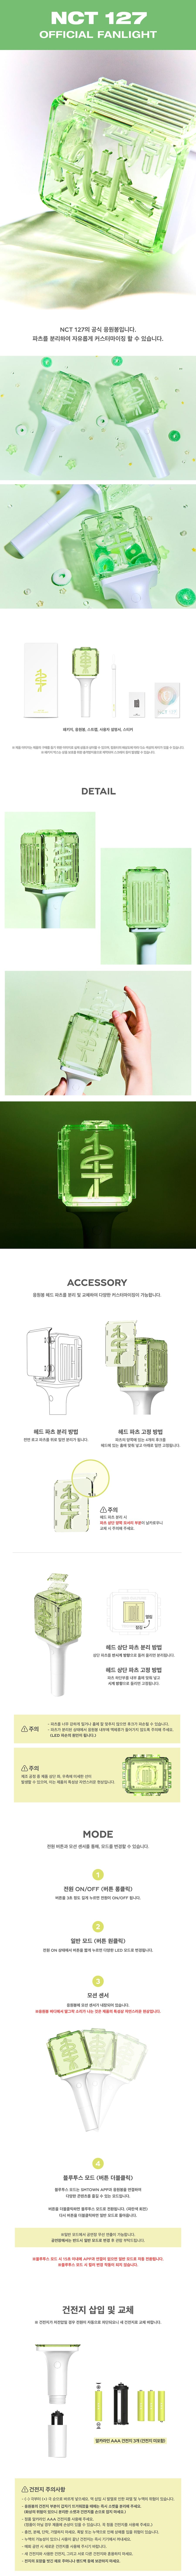 nct-official-fanlight-ver-2-nct-127-ver-wholesales